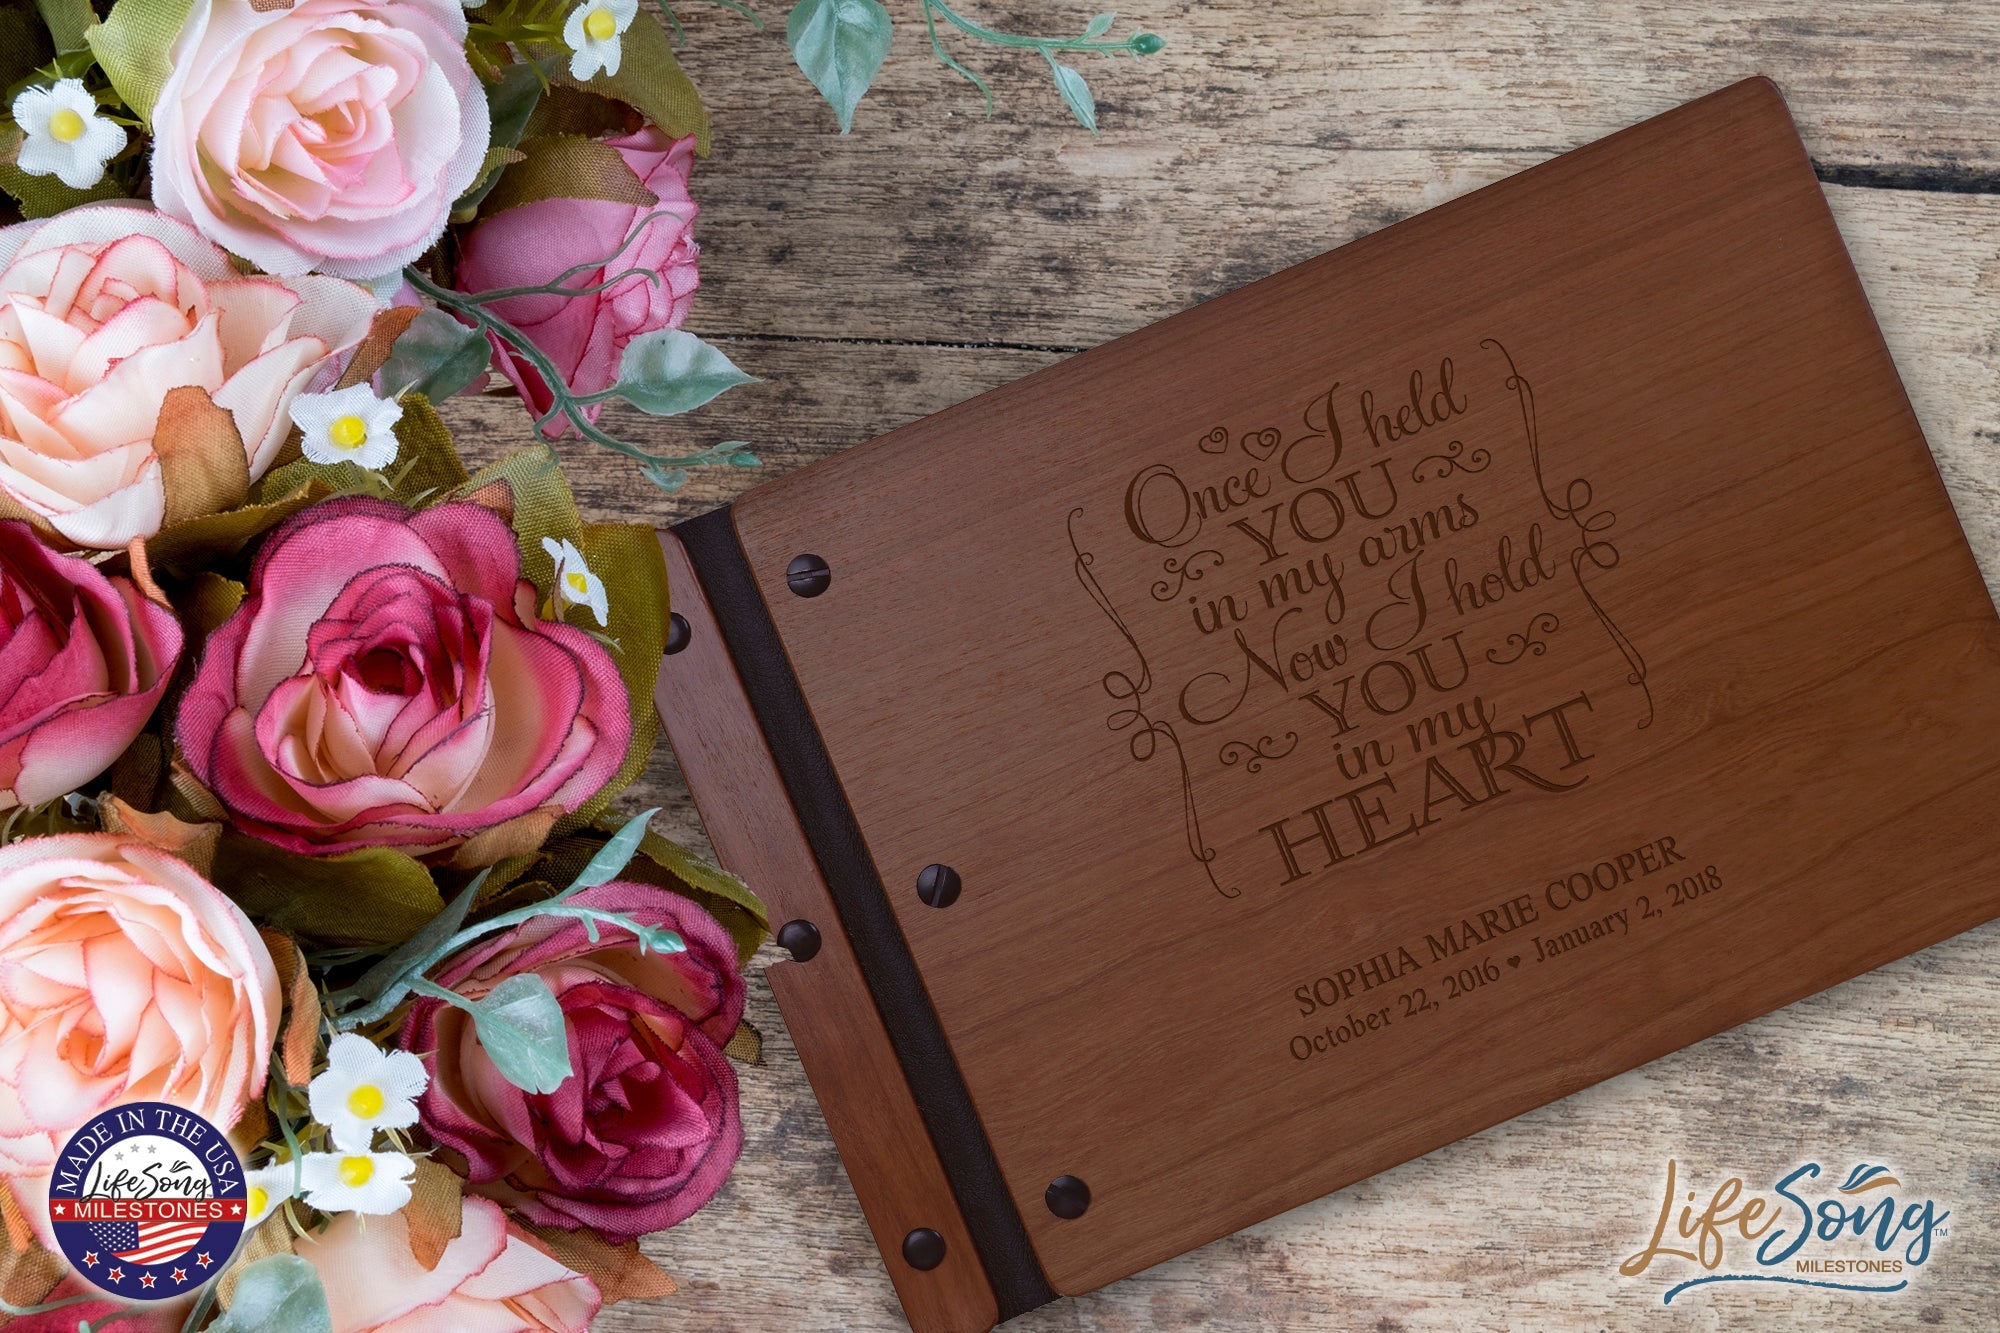 Personalized Memorial Guest Book - Once I Held You - LifeSong Milestones